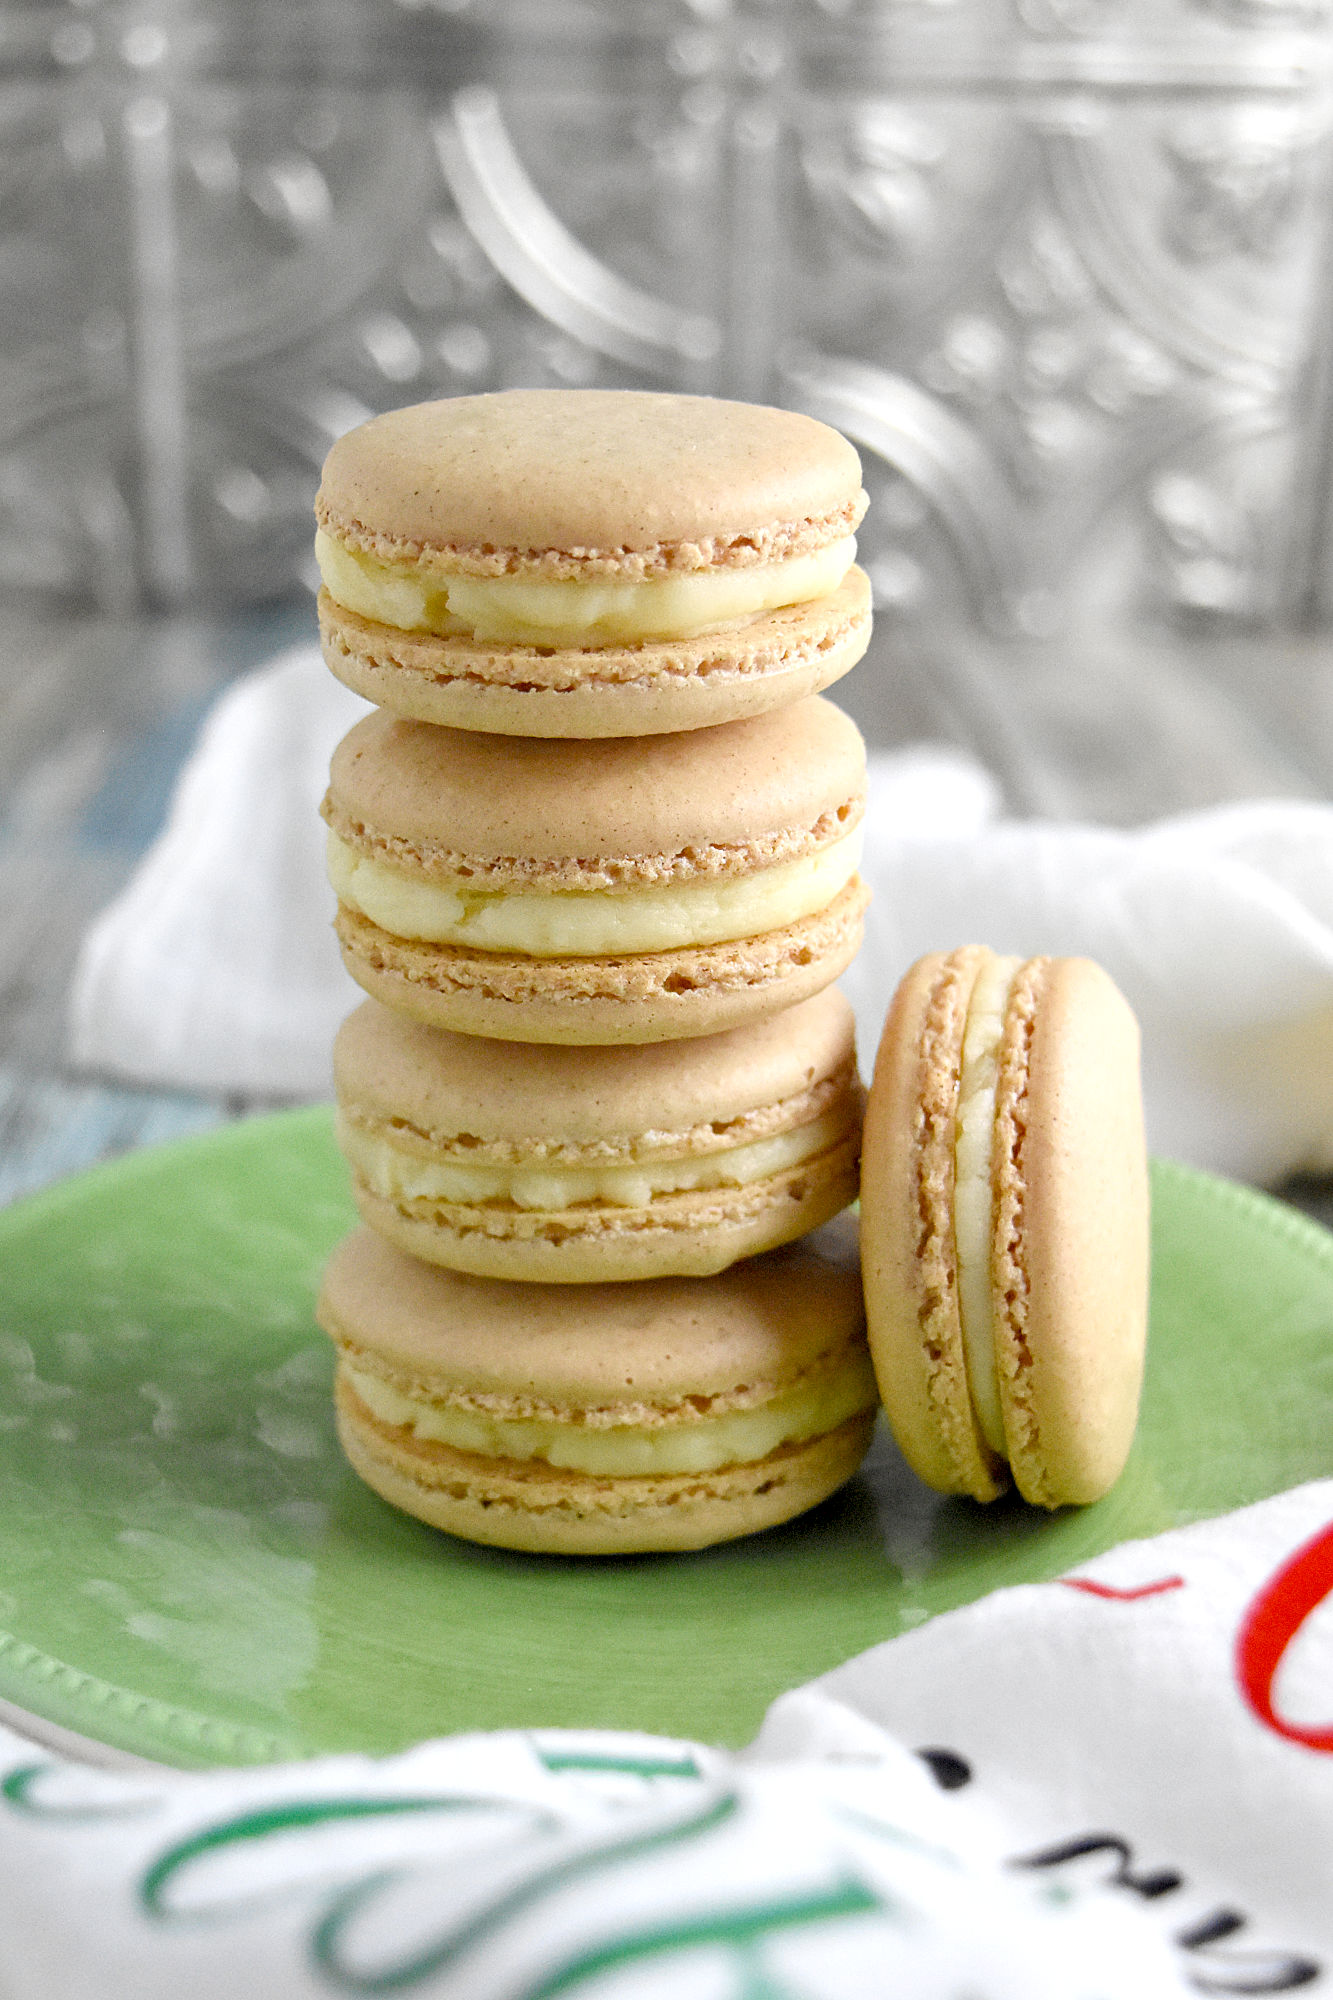 Cinnamon Toast Macaron have melba toast and cinnamon in the shells and filled with butter flavored buttercream. It’s the ultimate in cinnamon toast flavor. #ChristmasCookiesWeek